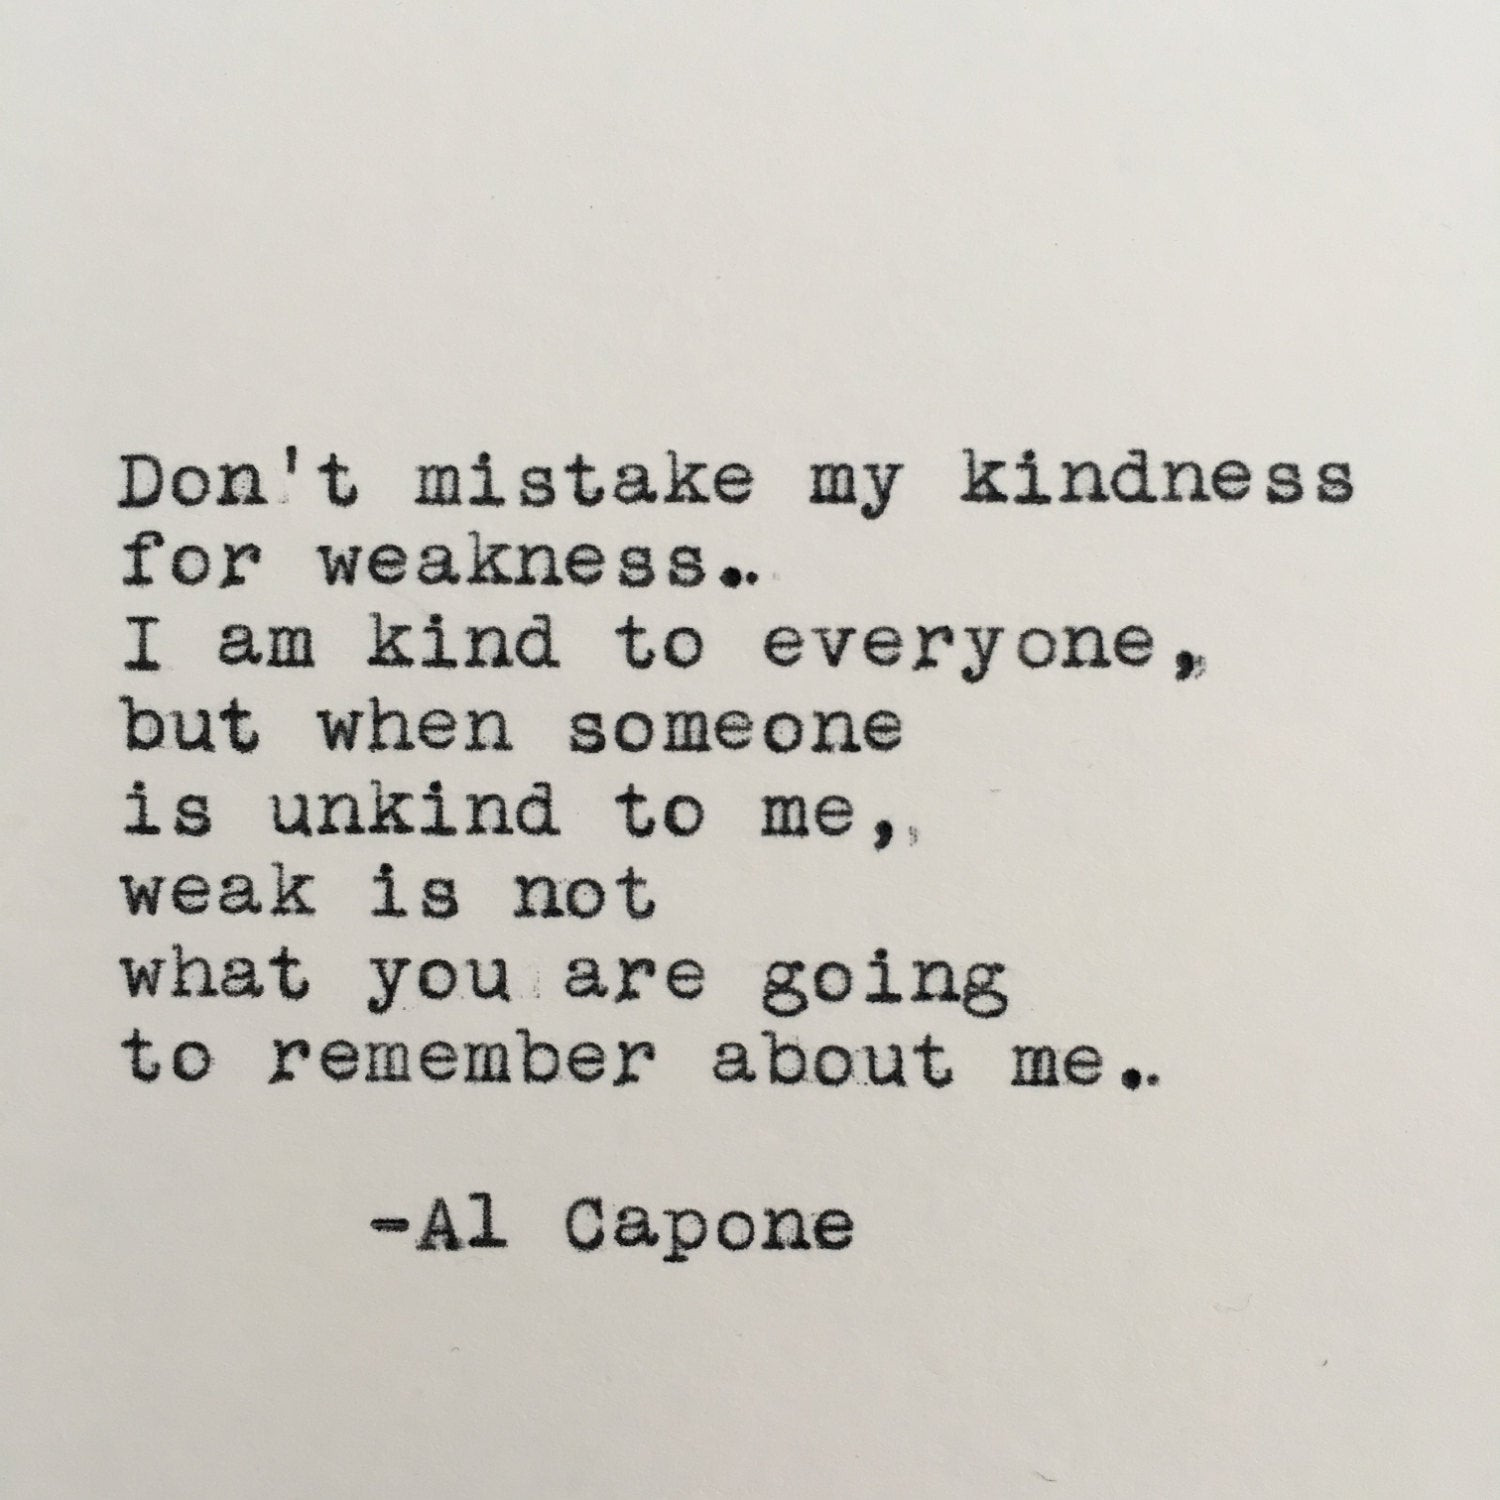 Al Capone Quote Kindness
 Al Capone Kindness Quote Typed on Typewriter 4x6 White